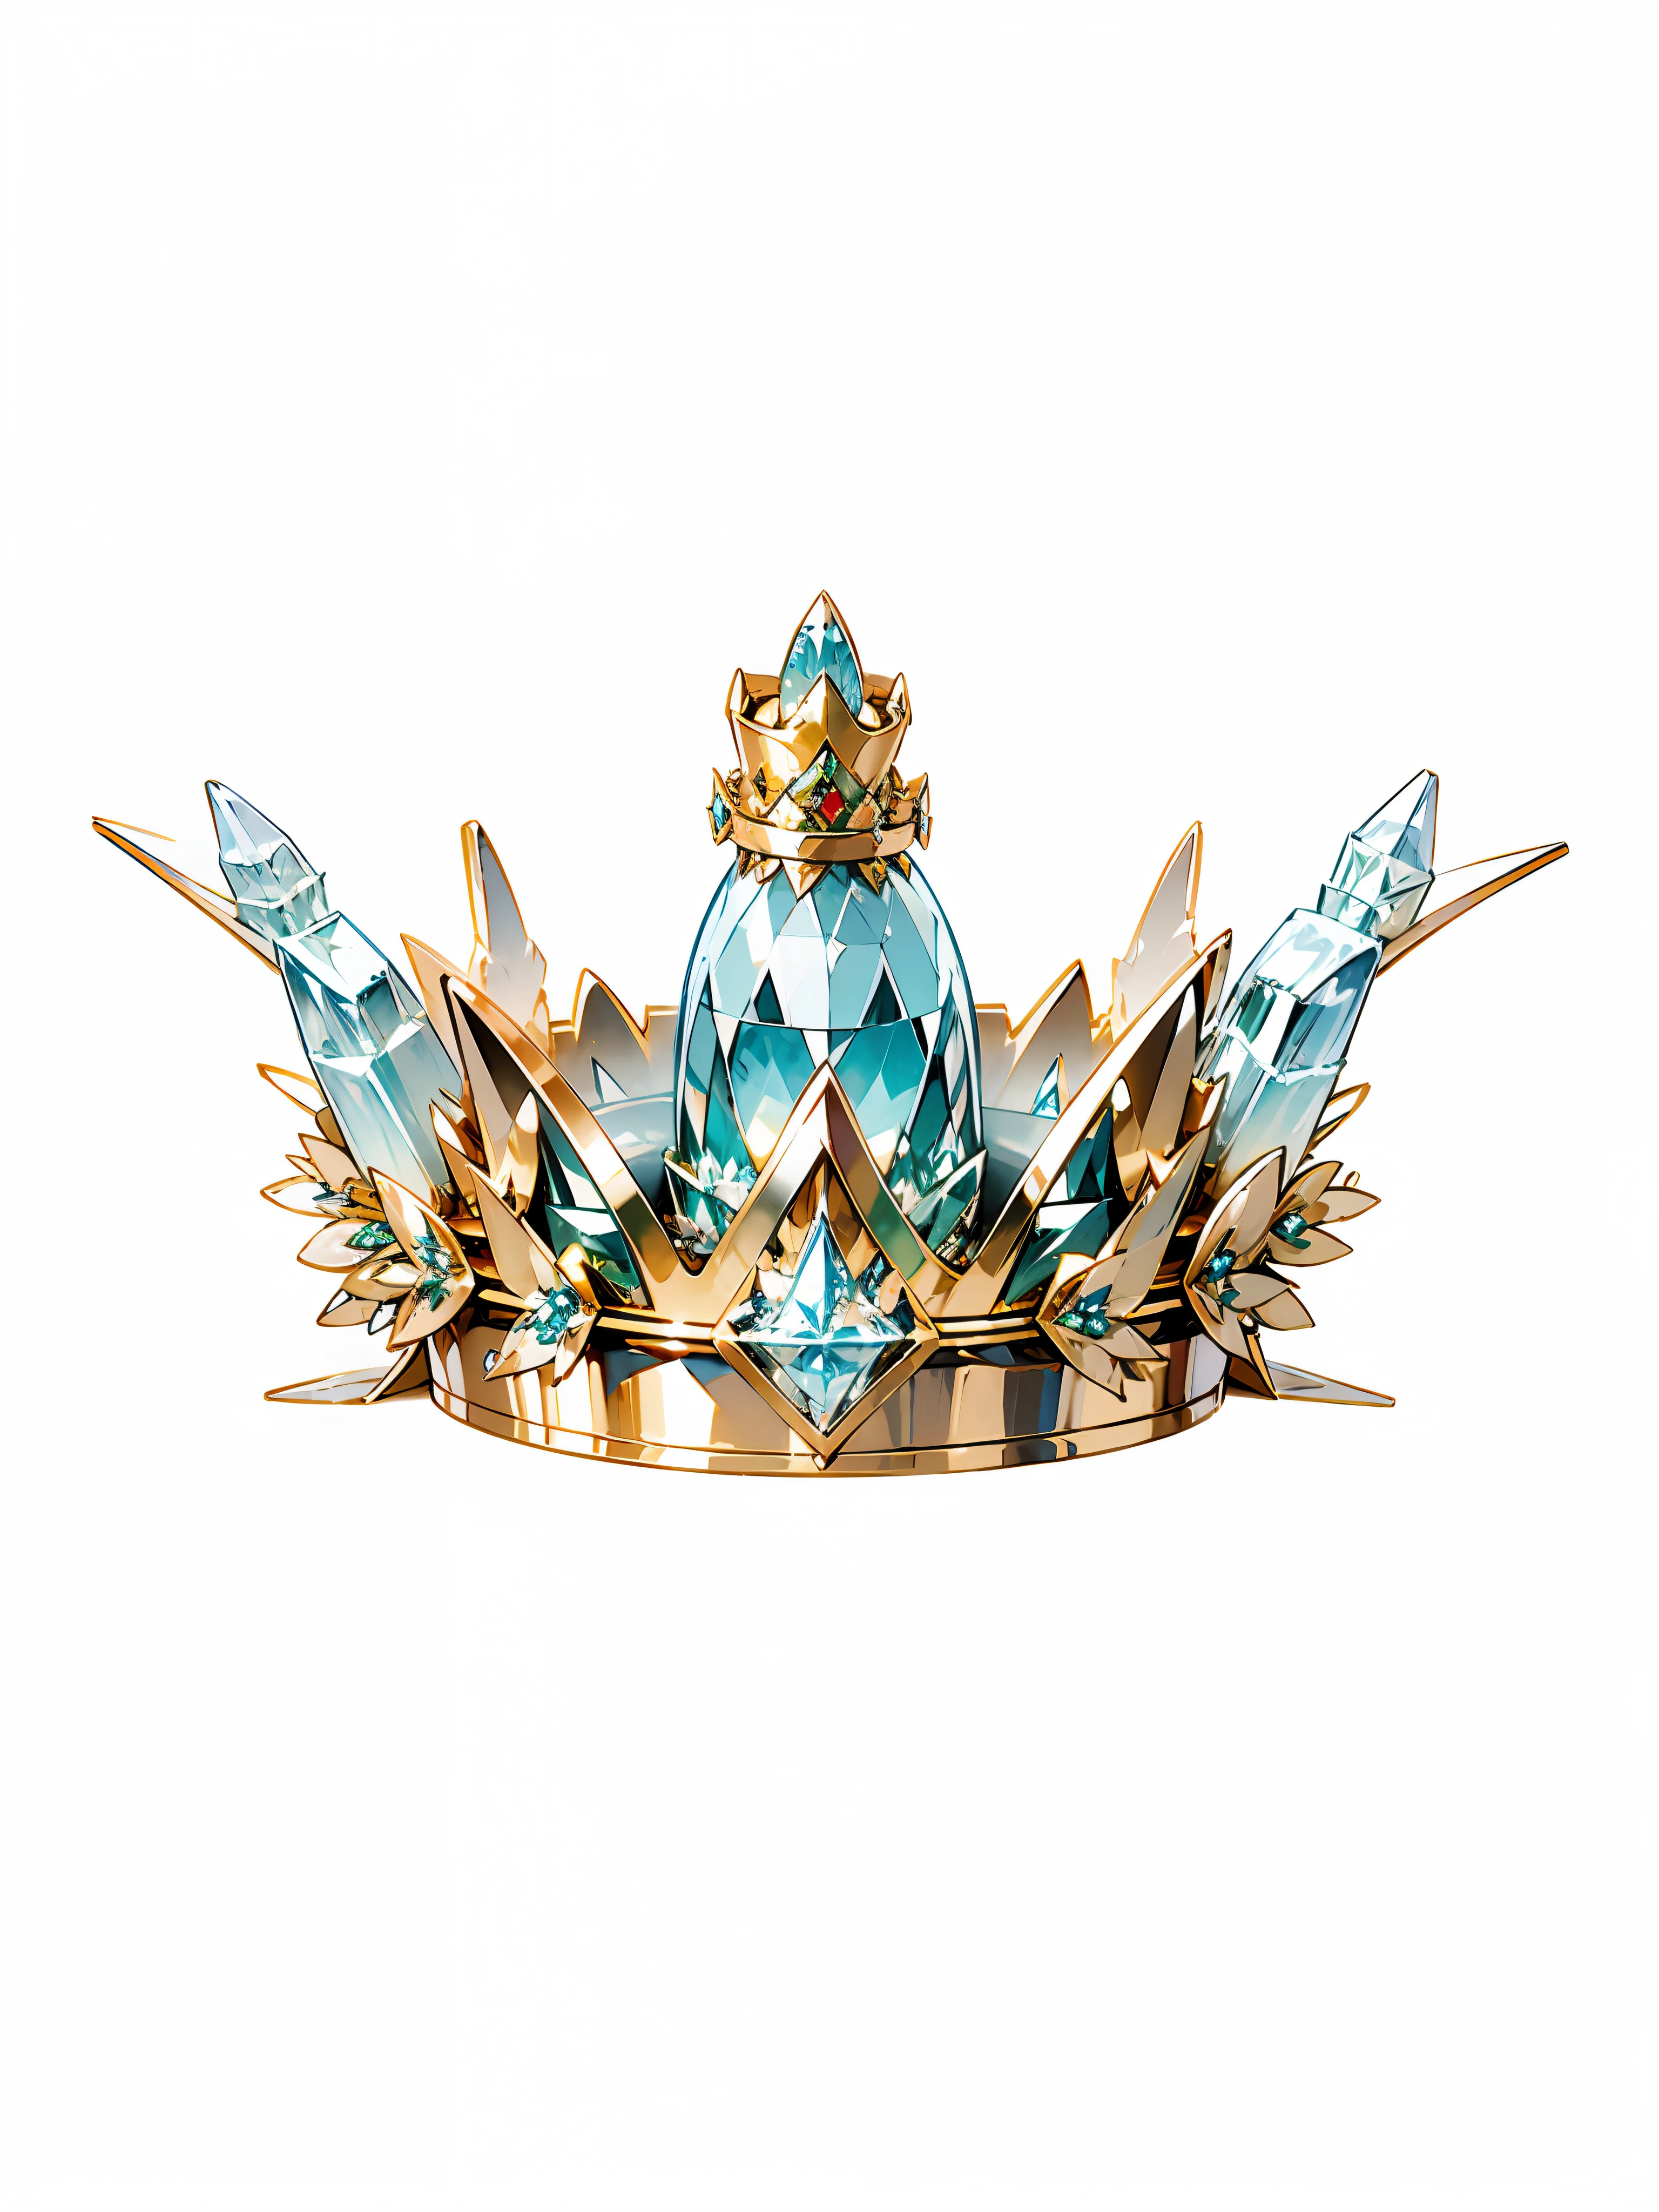 8k, (crown close-up), (((looking up))), with a gold + diamond crown on white background, diamond wings!! ,((((((Elf Crown)))),(Game Crown)))),(Gold + Diamond Crown)),((Left and Right Symmetrical Crown)),(((Streamlined Crown)))),(((Slender Crown))), Gorgeous, Colorful, Complex Diamonds, Ultra Realistic Fantasy Crown, Crystal Crown, White Laser Crown, Crystal Corolla, Floating Crown, (Ray Tracing), ((Clean Background)), Crown, Crown, Giant Diamond Crown, Diamond Tiara, Diamond Crown --auto --s2